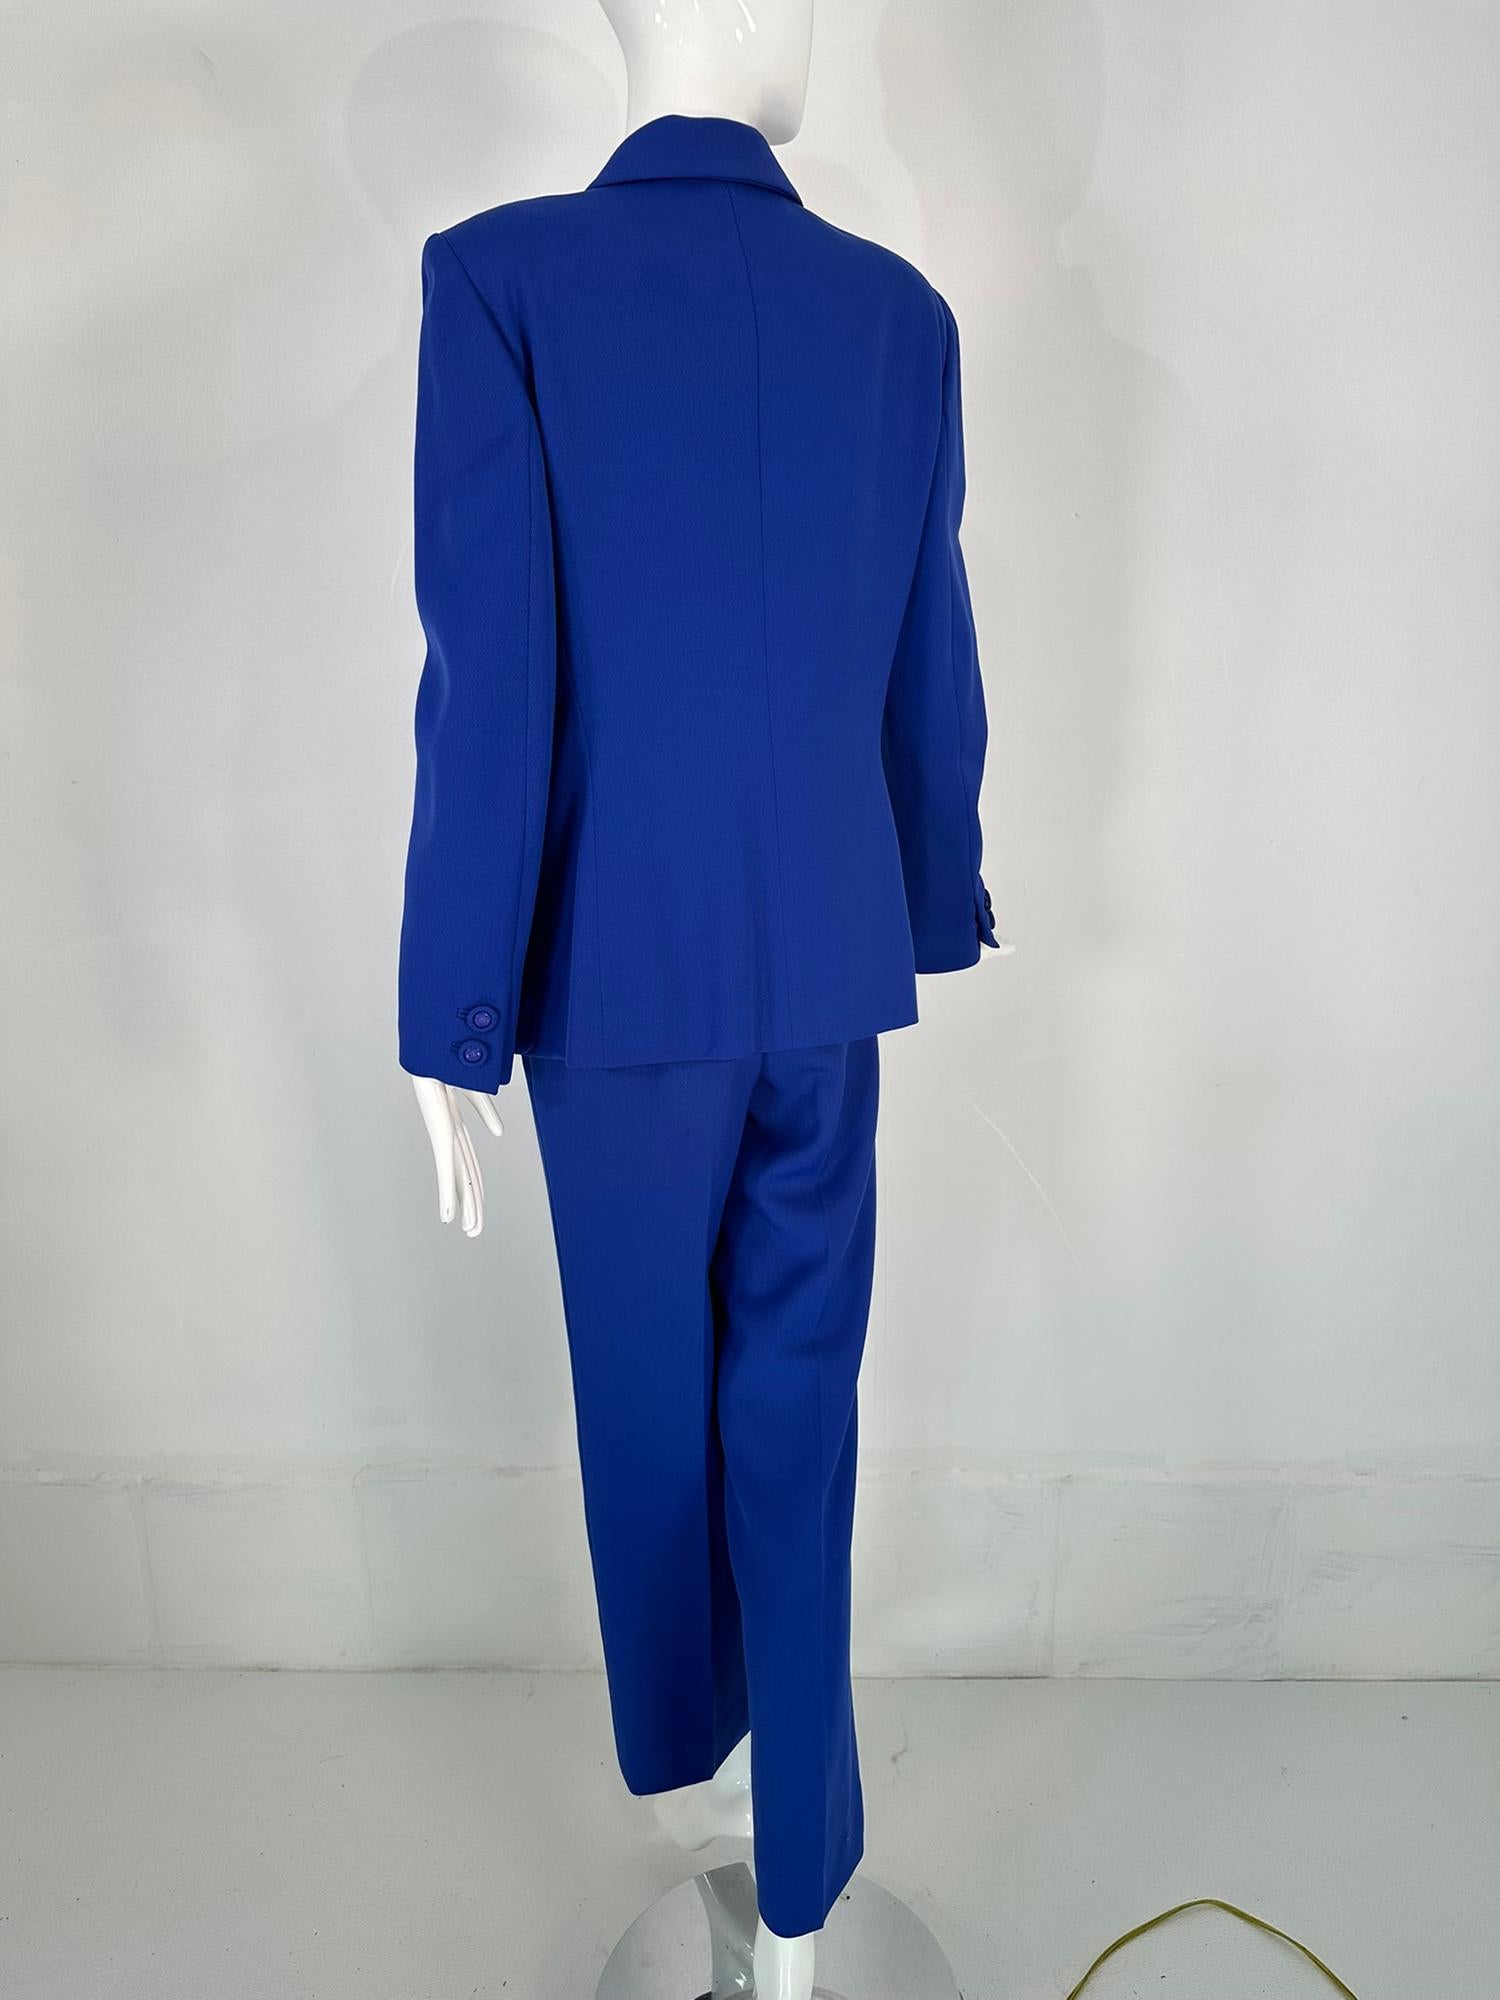 Gianni Versace Couture F/W 1995 Royal Blue Wool Pant Suit  For Sale 2